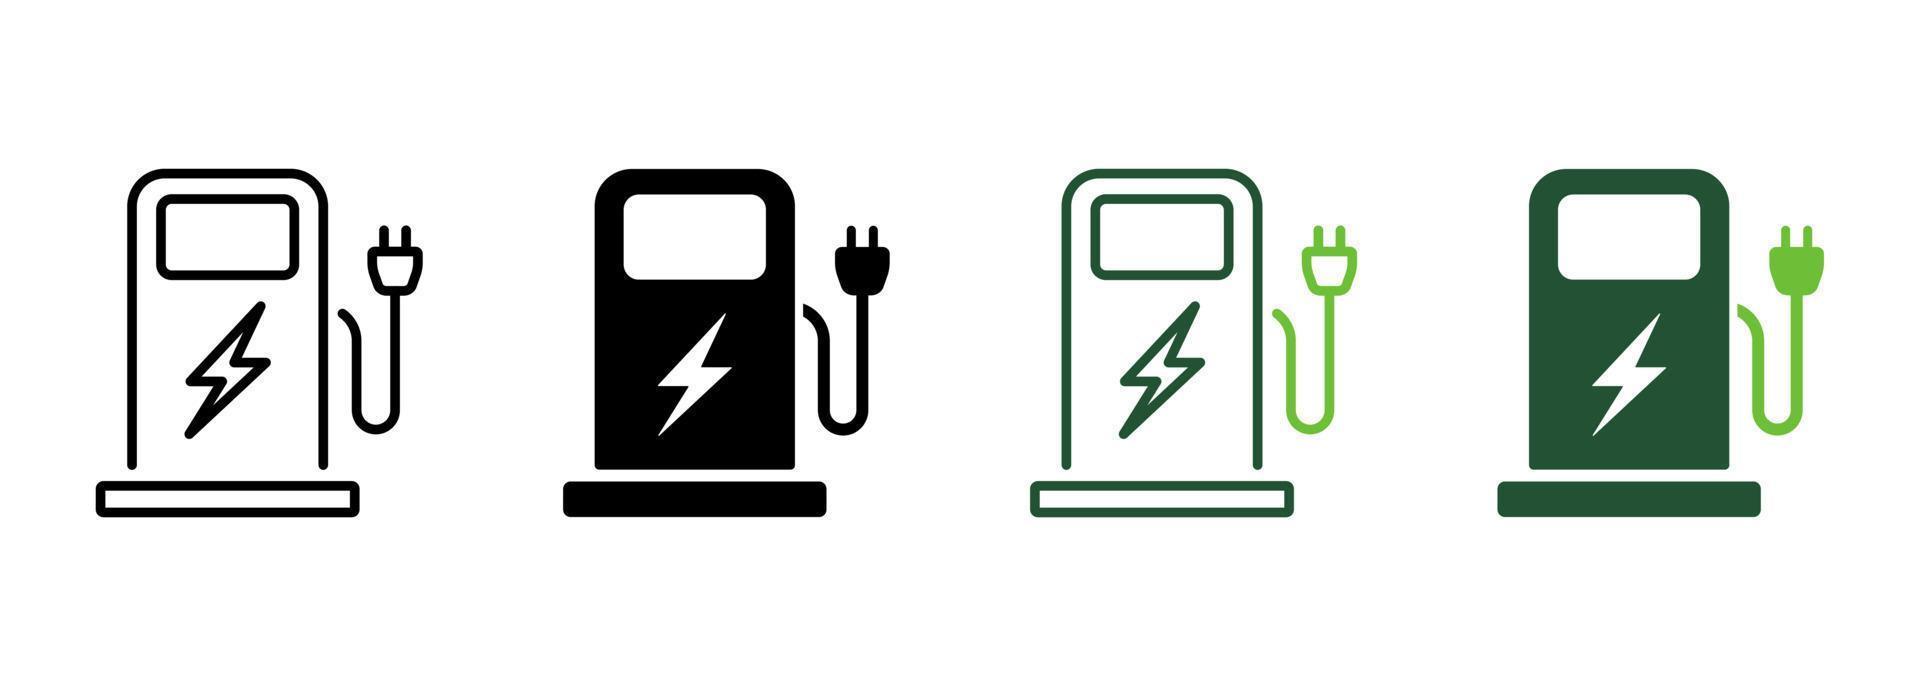 Electric Station for Vehicle Car Line and Silhouette Icon Color Set. Charger with Plug for Electrical Power Auto Symbols. Charge Station for Green Energy Automobile. Isolated Vector Illustration.